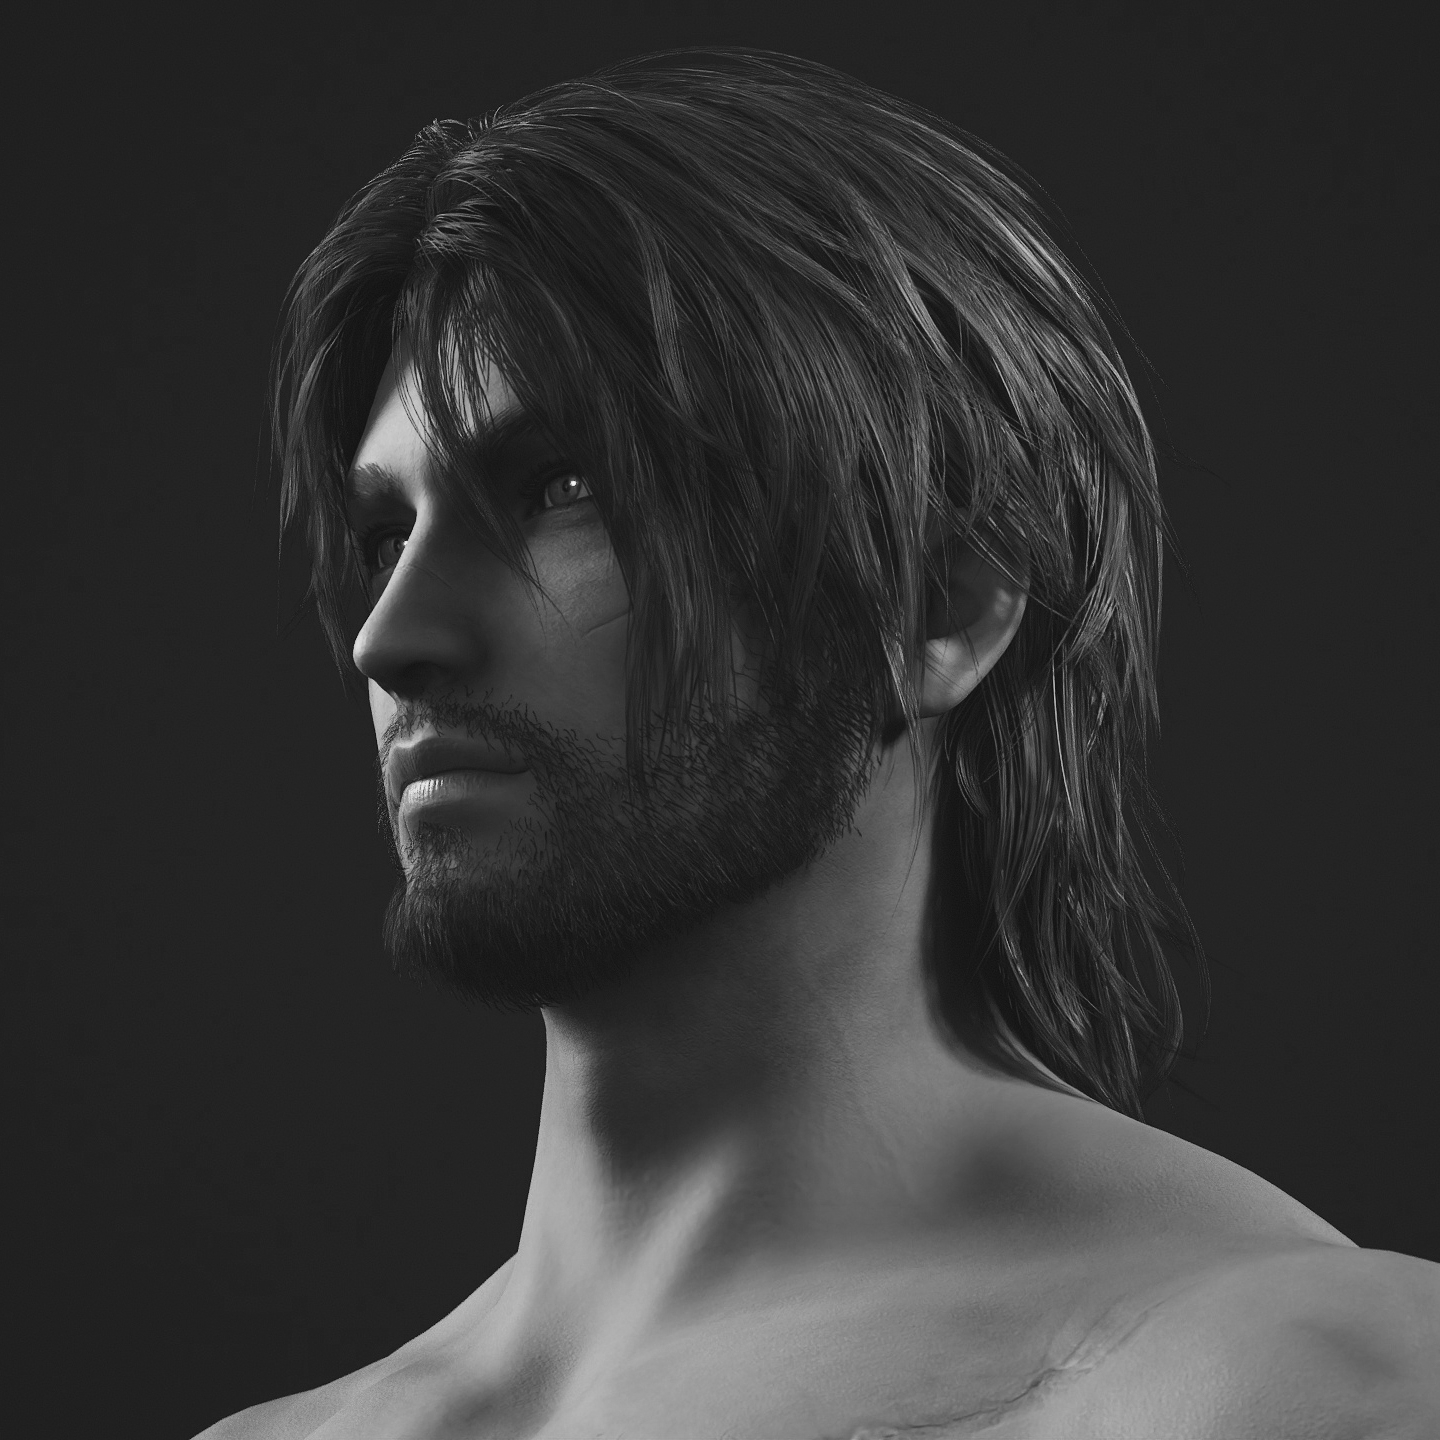 More texture progress and hair work on this Greek guy  Male Warrior Scars Man 7